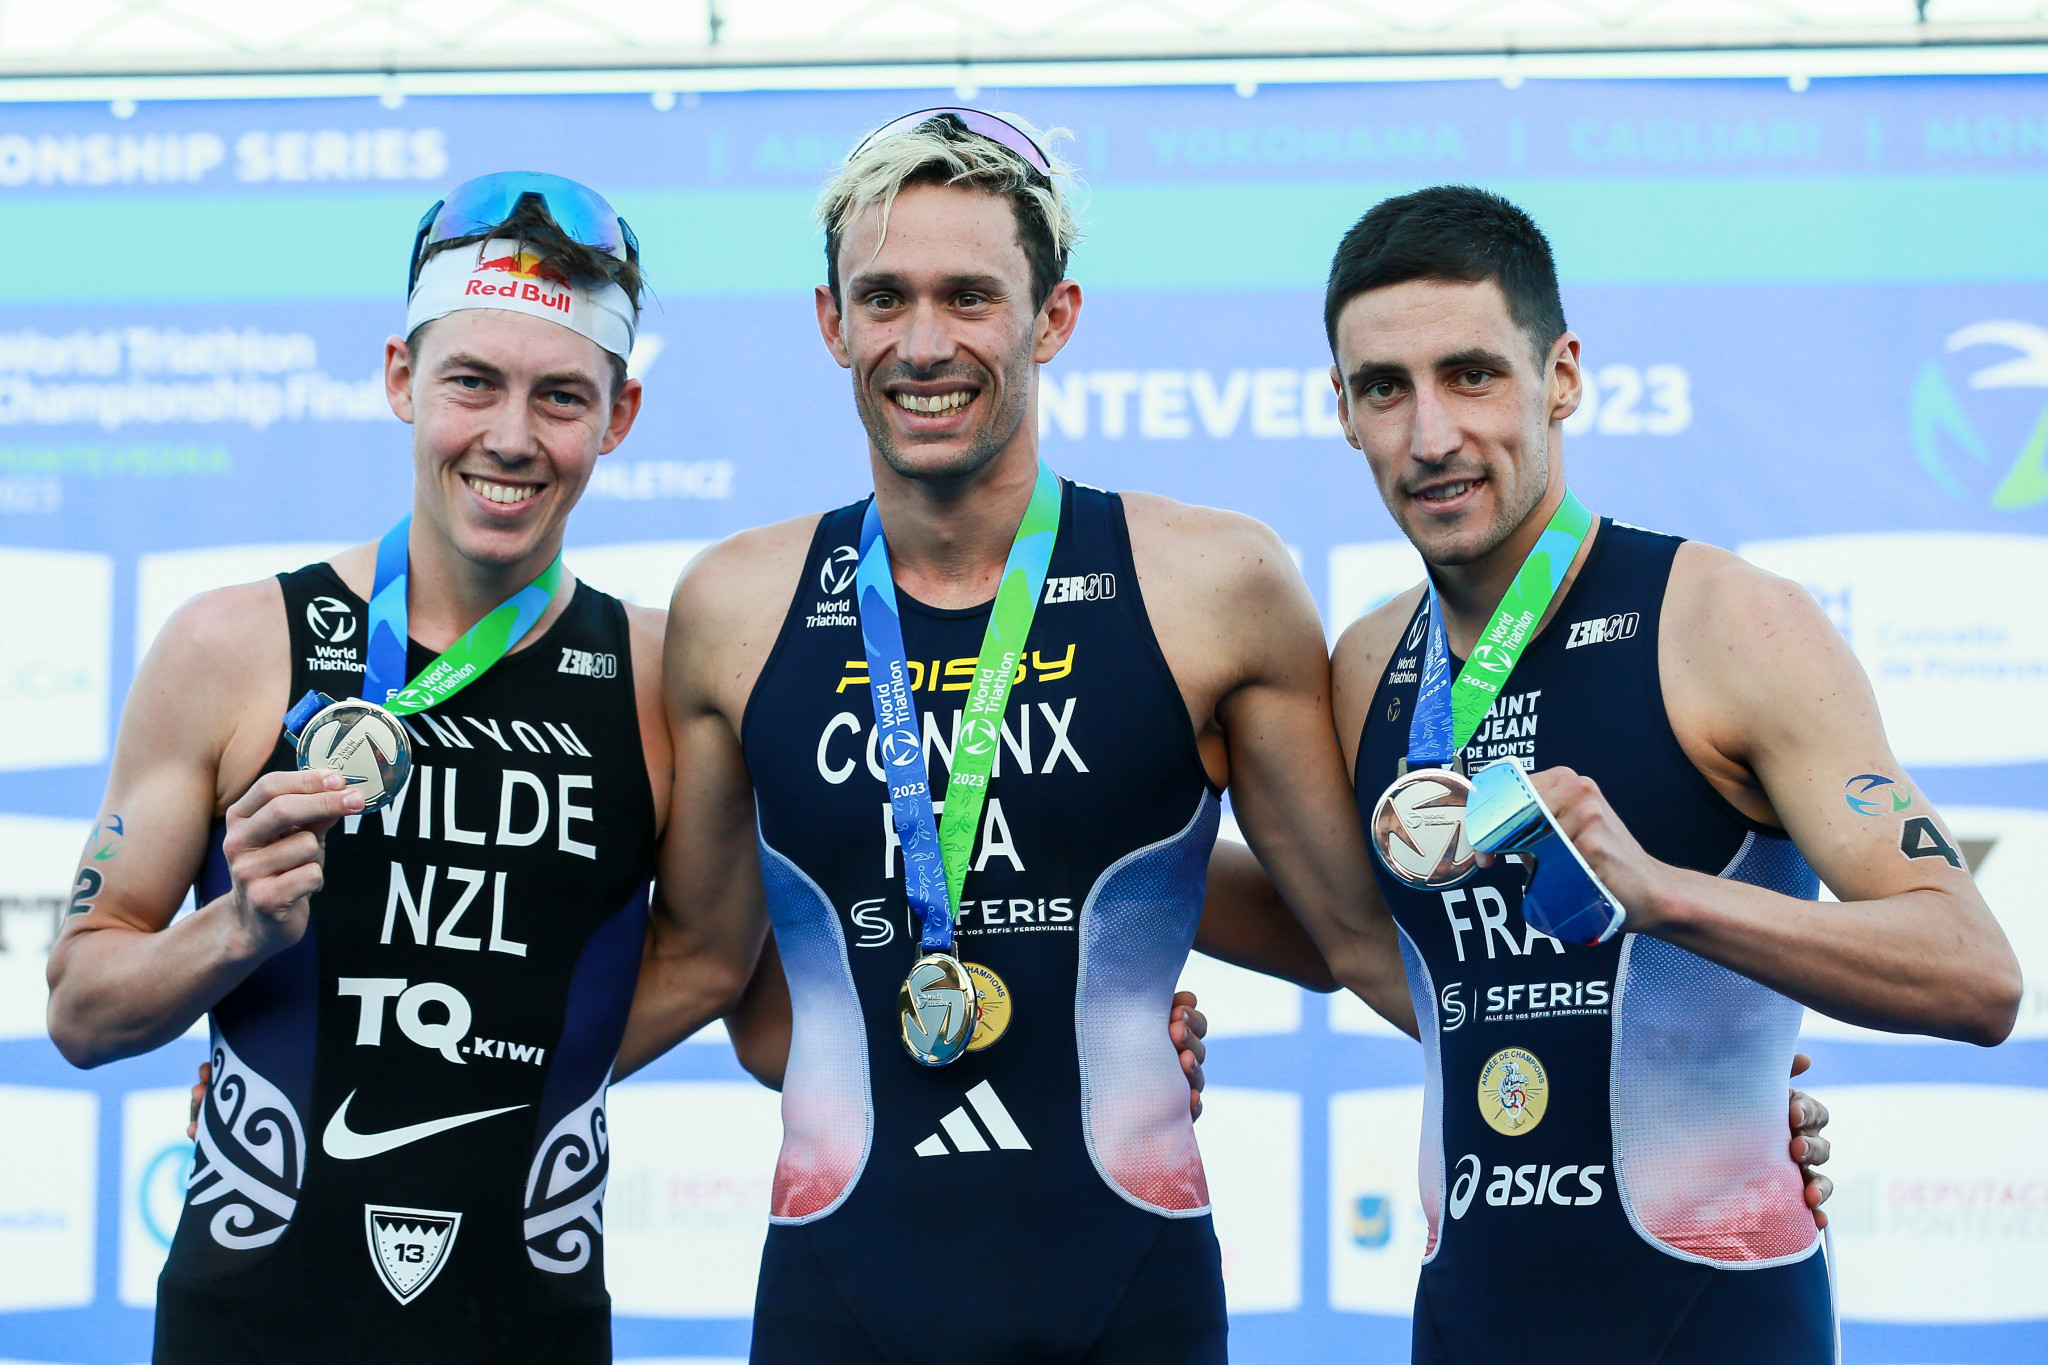 Hayden Wilde of New Zealand, left, had to settle for second overall after finishing ninth in Pontevedra, including a damaging 15sec penalty ©World Triathlon